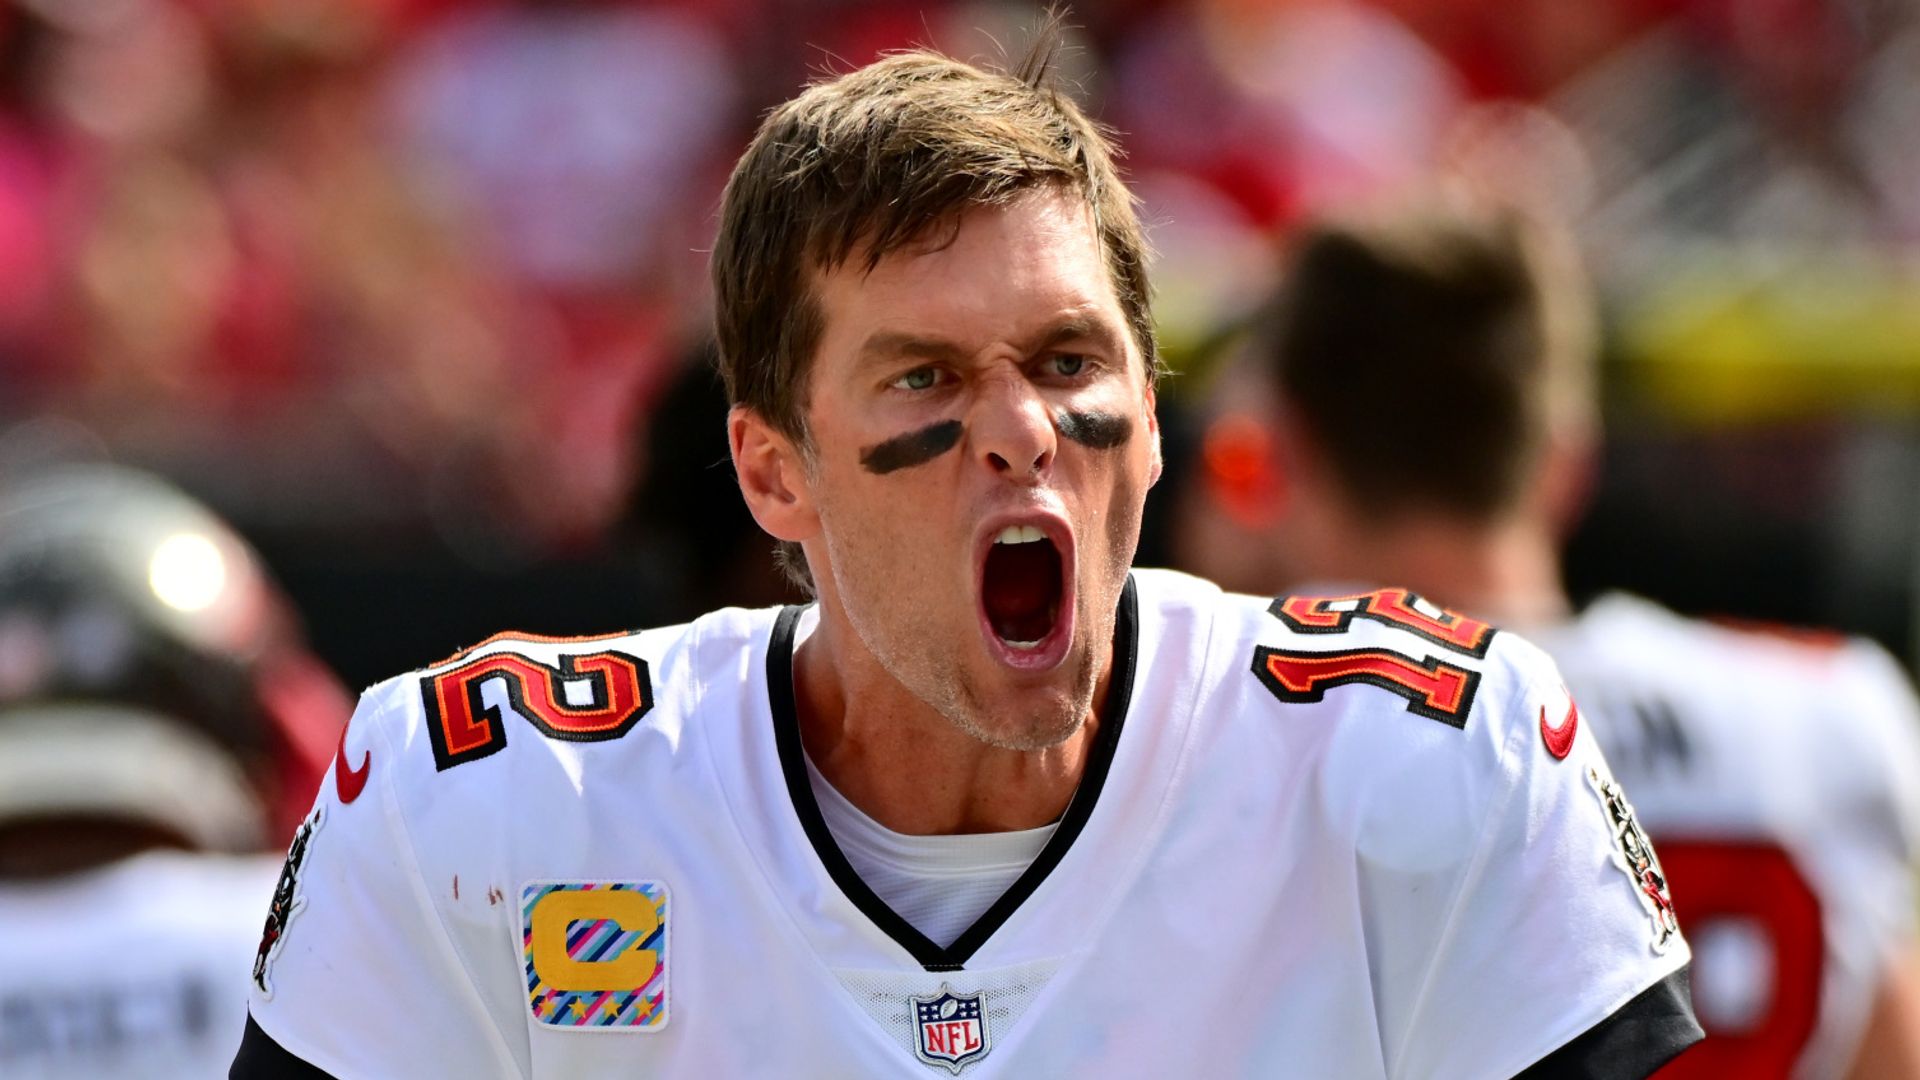 What's going wrong with Brady and the Bucs?